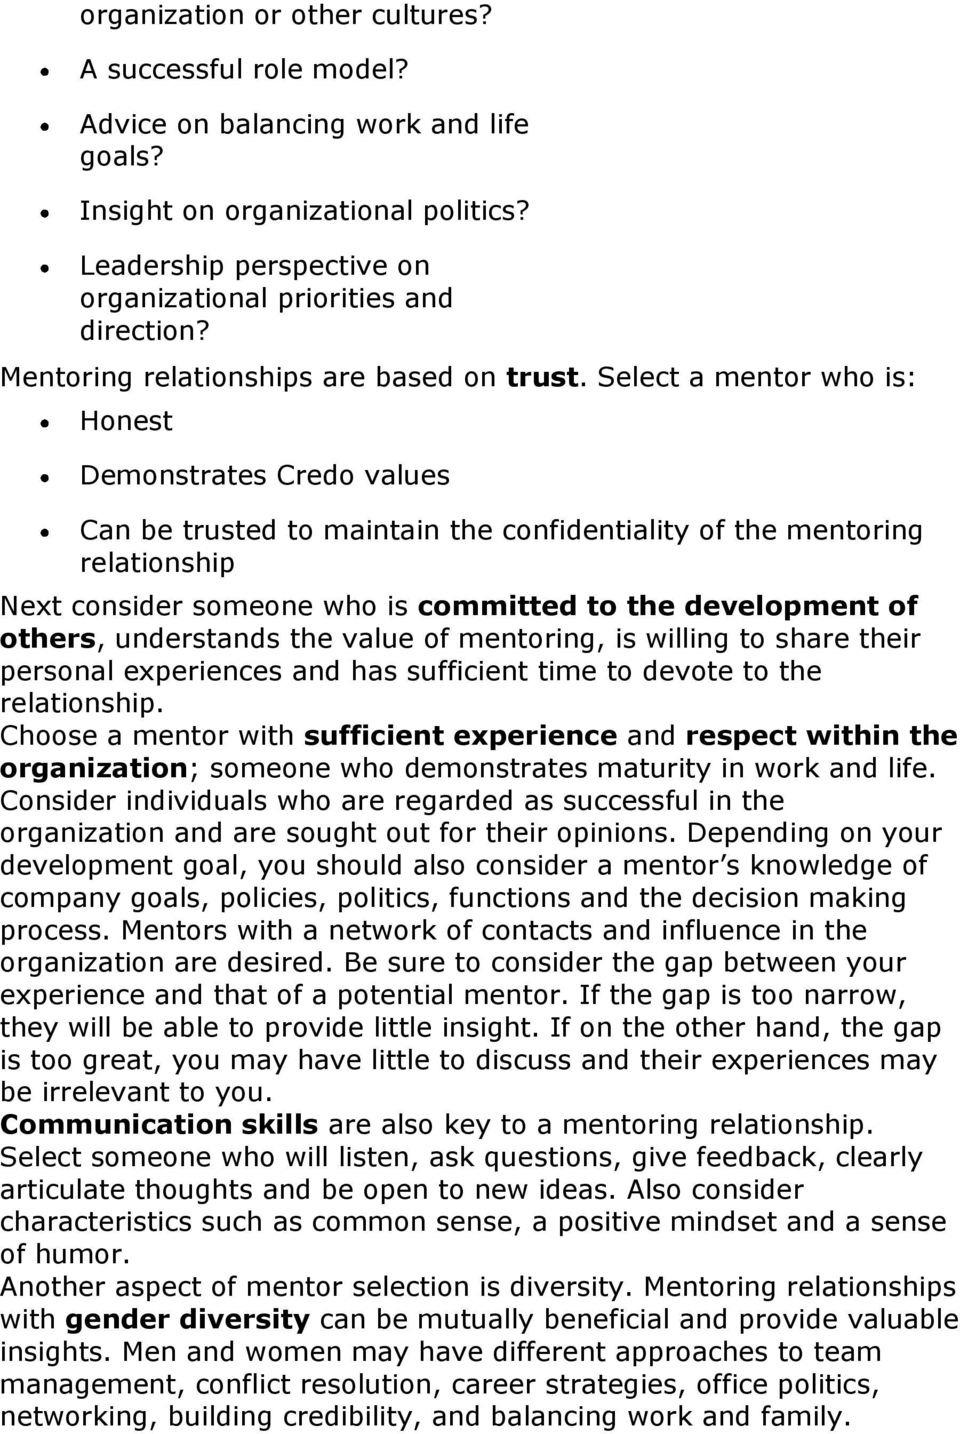 Select a mentor who is: Honest Demonstrates Credo values Can be trusted to maintain the confidentiality of the mentoring relationship Next consider someone who is committed to the development of